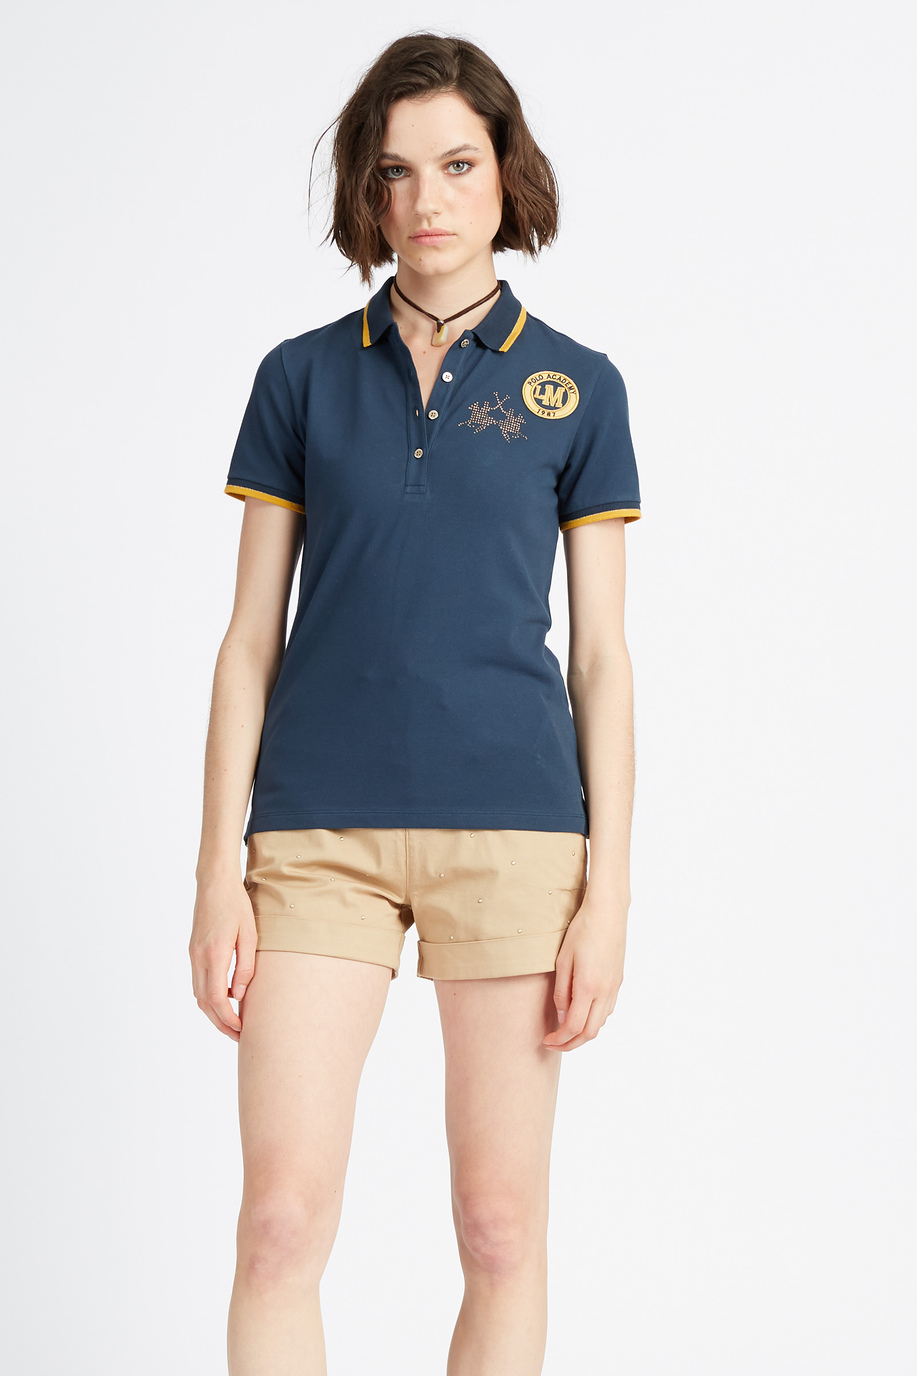 Short-sleeved women's polo shirt with sequined logo and Polo Academy patch - Varka | La Martina - Official Online Shop